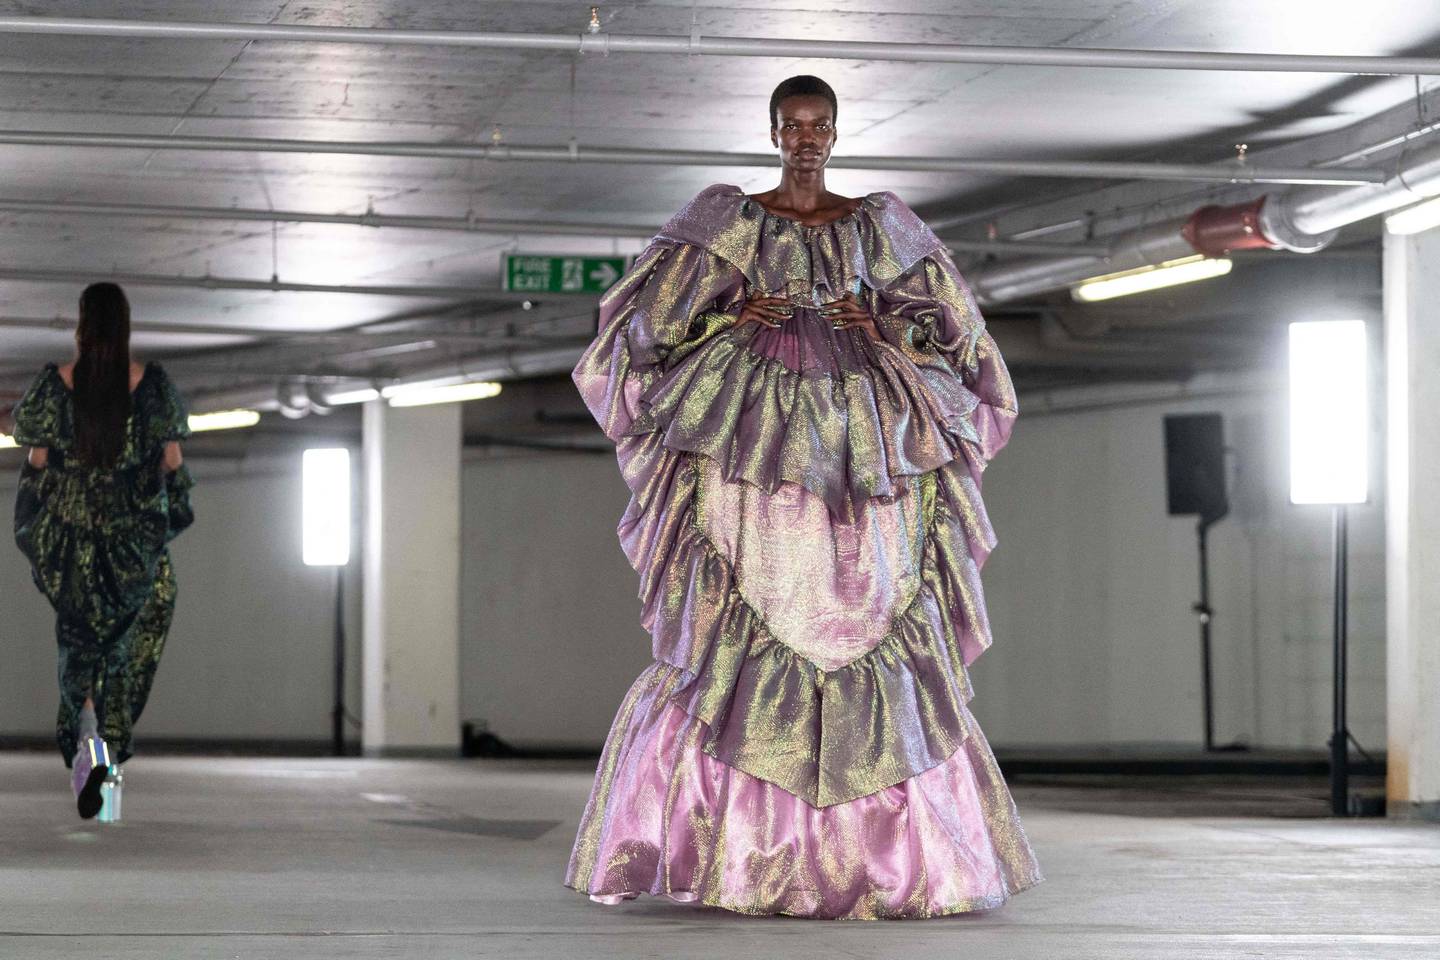 A model walks in a gown made from metallic jacquard for the Edward Crutchley spring/summer 2023 show, which was held in an underground car park. AFP